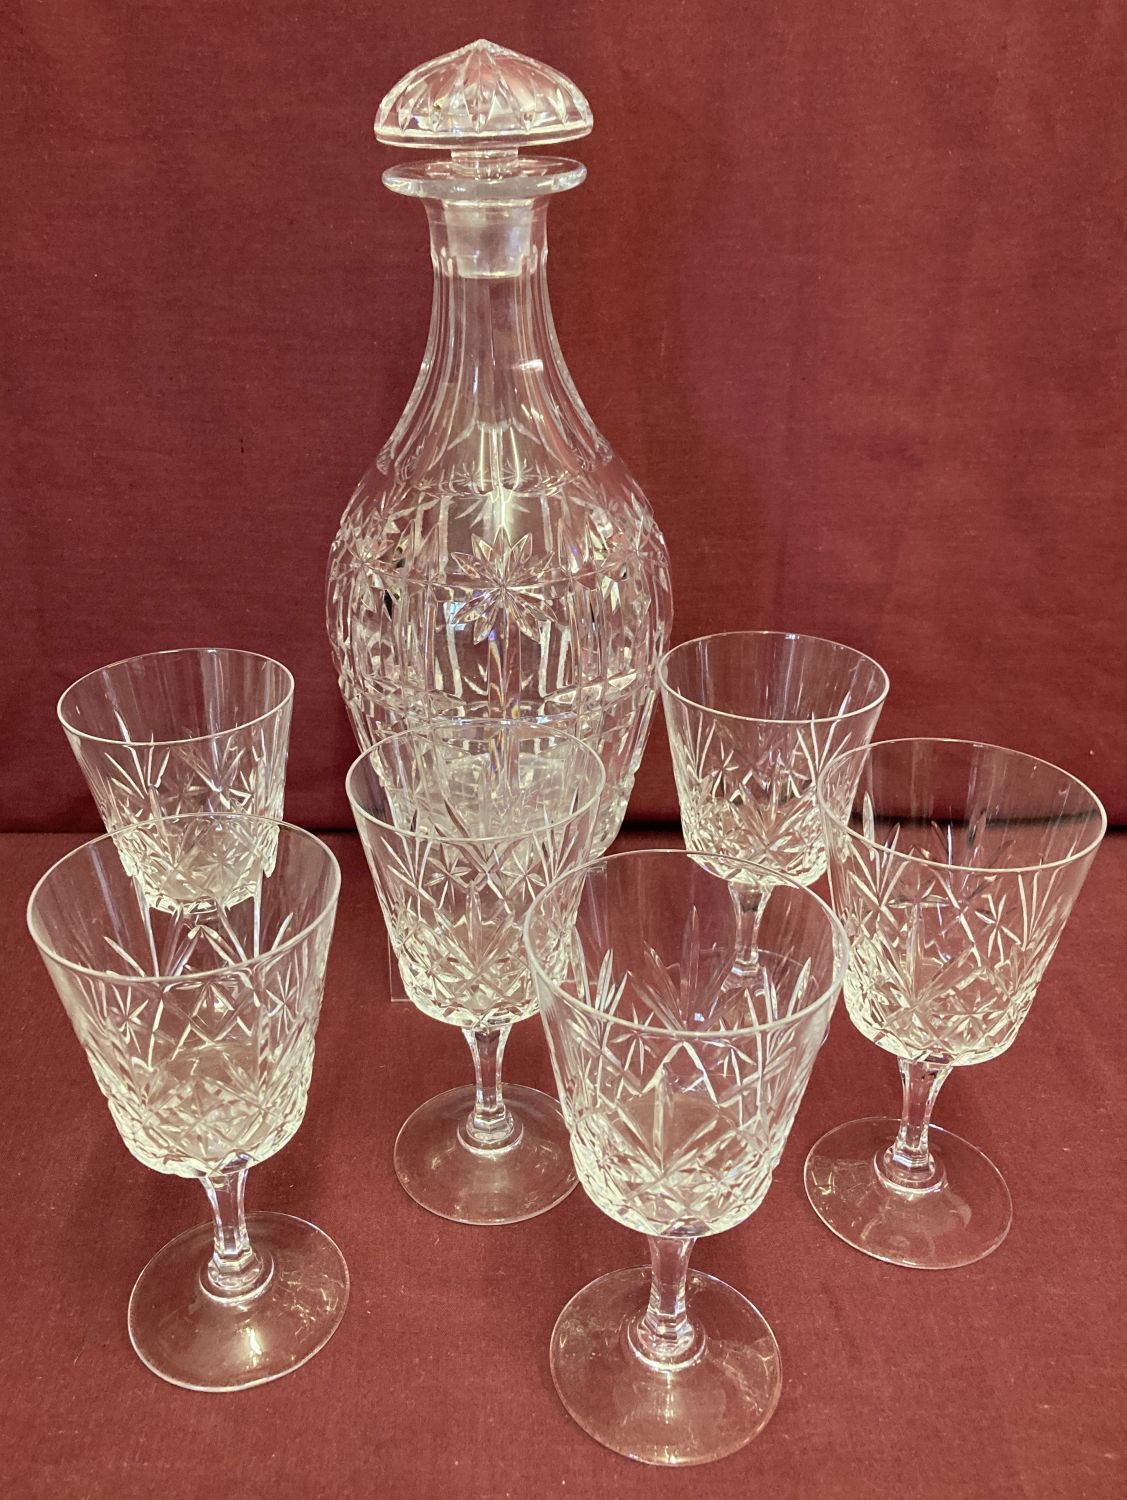 A heavy cut crystal decanter together with a set of cut glass stemmed glasses.